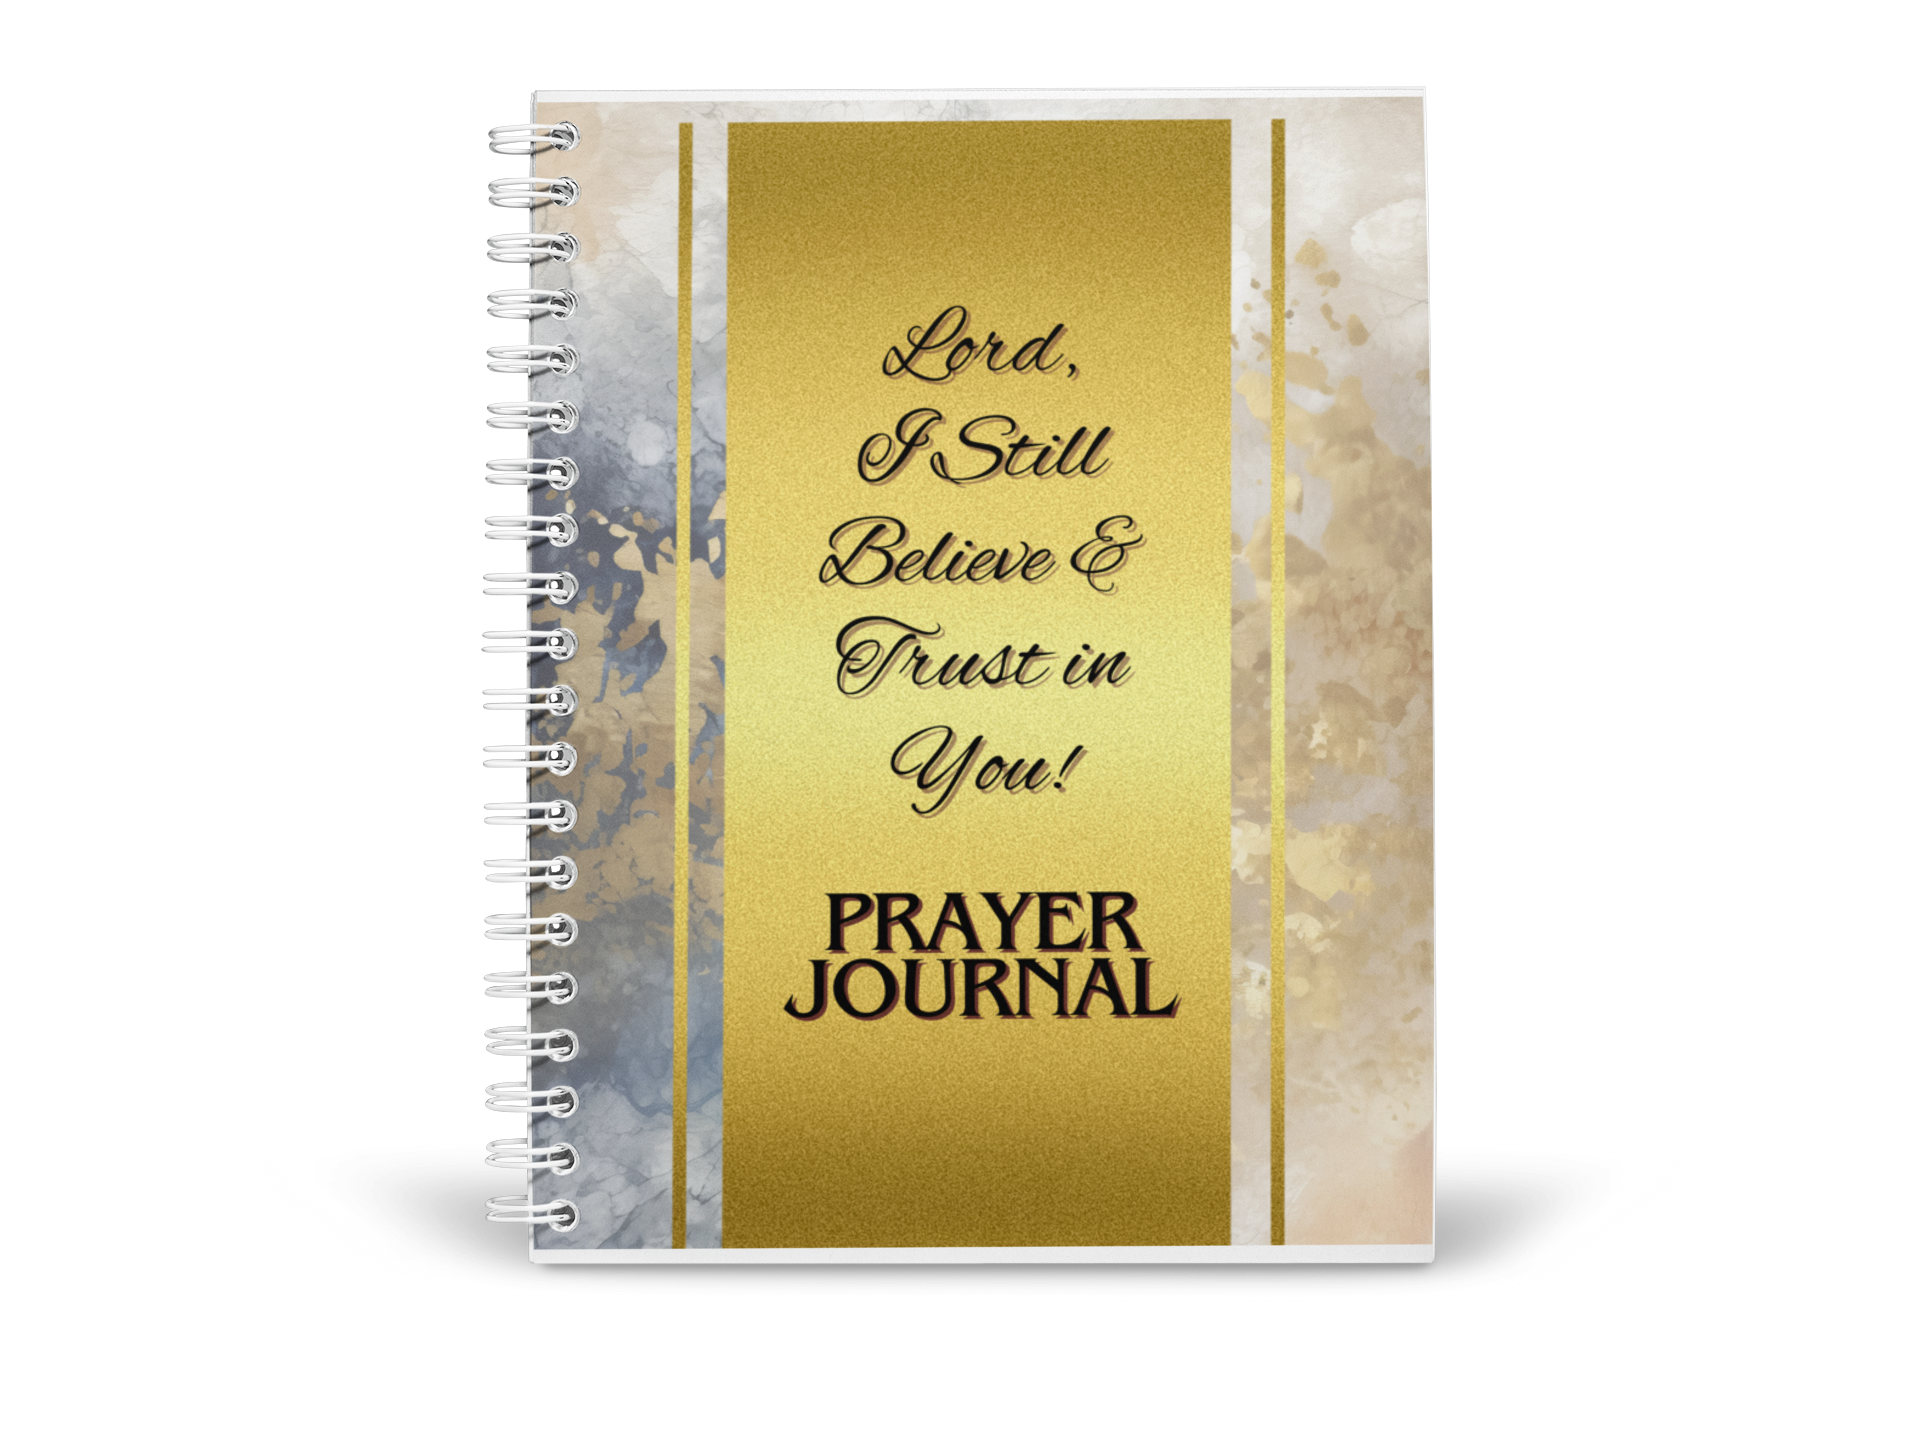 Monthly "Prayer" Journal SubscriptionA Prayer Journal is a sacred space where individuals can record their thoughts, reflections, and conversations with God. It serves as a personal repository for prayeNOTEBOOK/JOURNALCreatively Joy Creatively Joy, LLC"Prayer" Journal